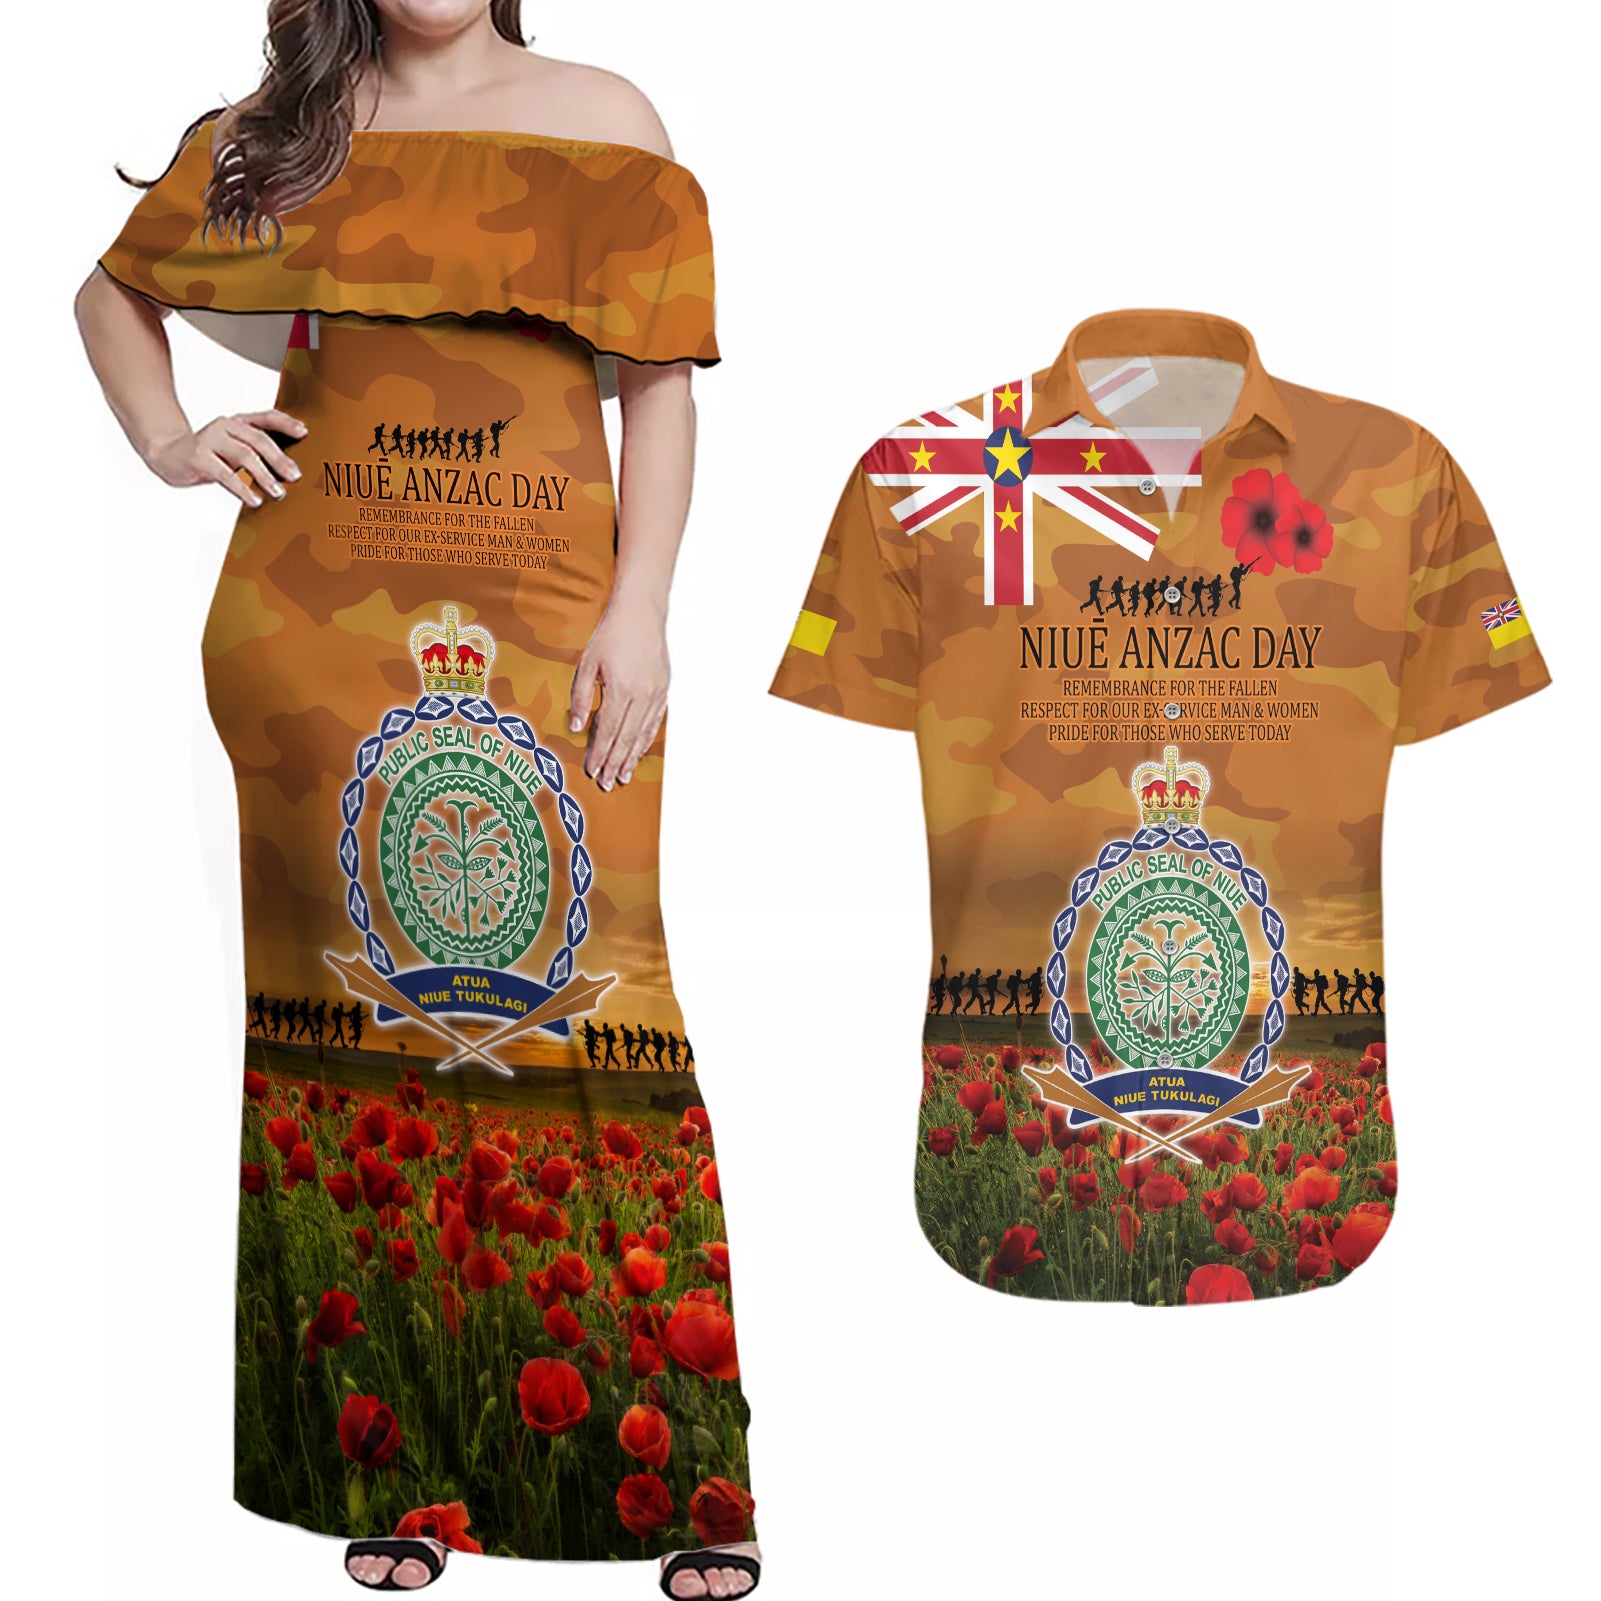 Niue ANZAC Day Personalised Couples Matching Off Shoulder Maxi Dress and Hawaiian Shirt with Poppy Field LT9 Art - Polynesian Pride